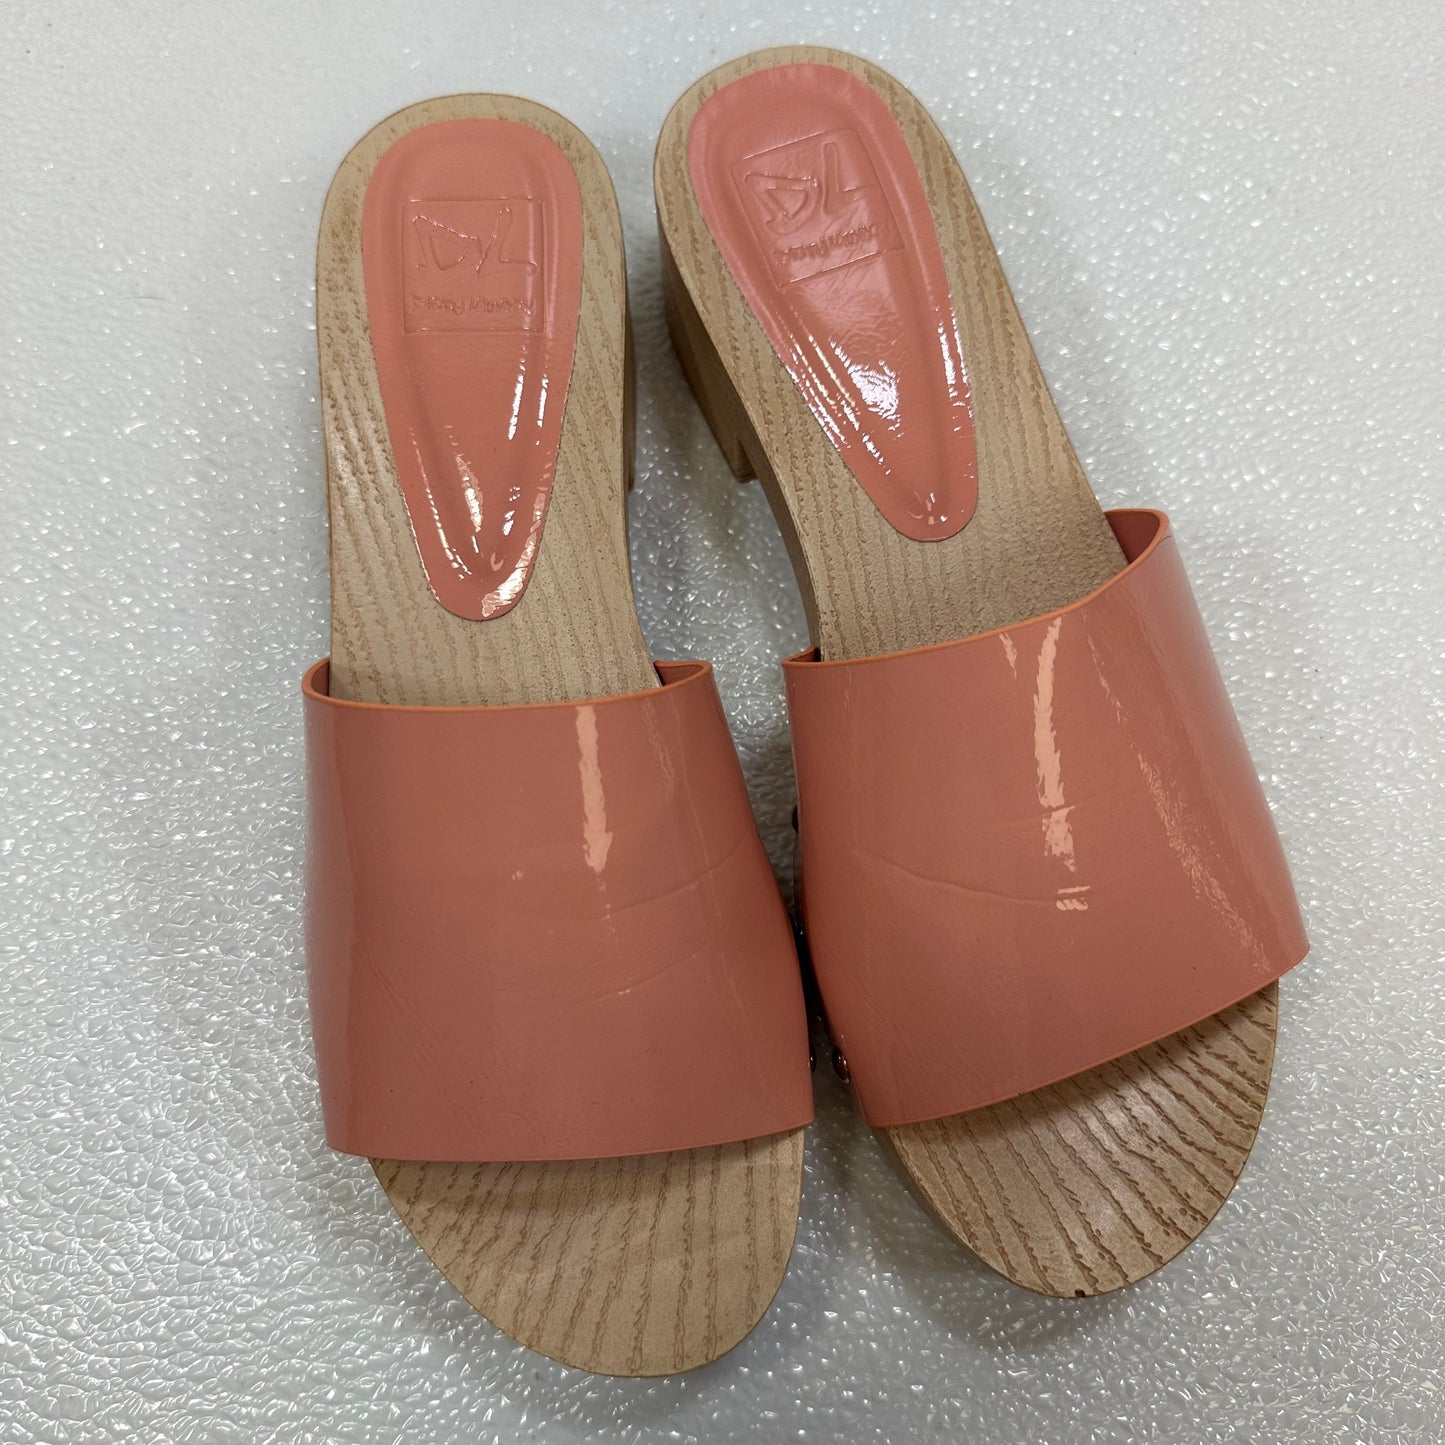 Sandals Heels Wedge By Dirty Laundry  Size: 7.5